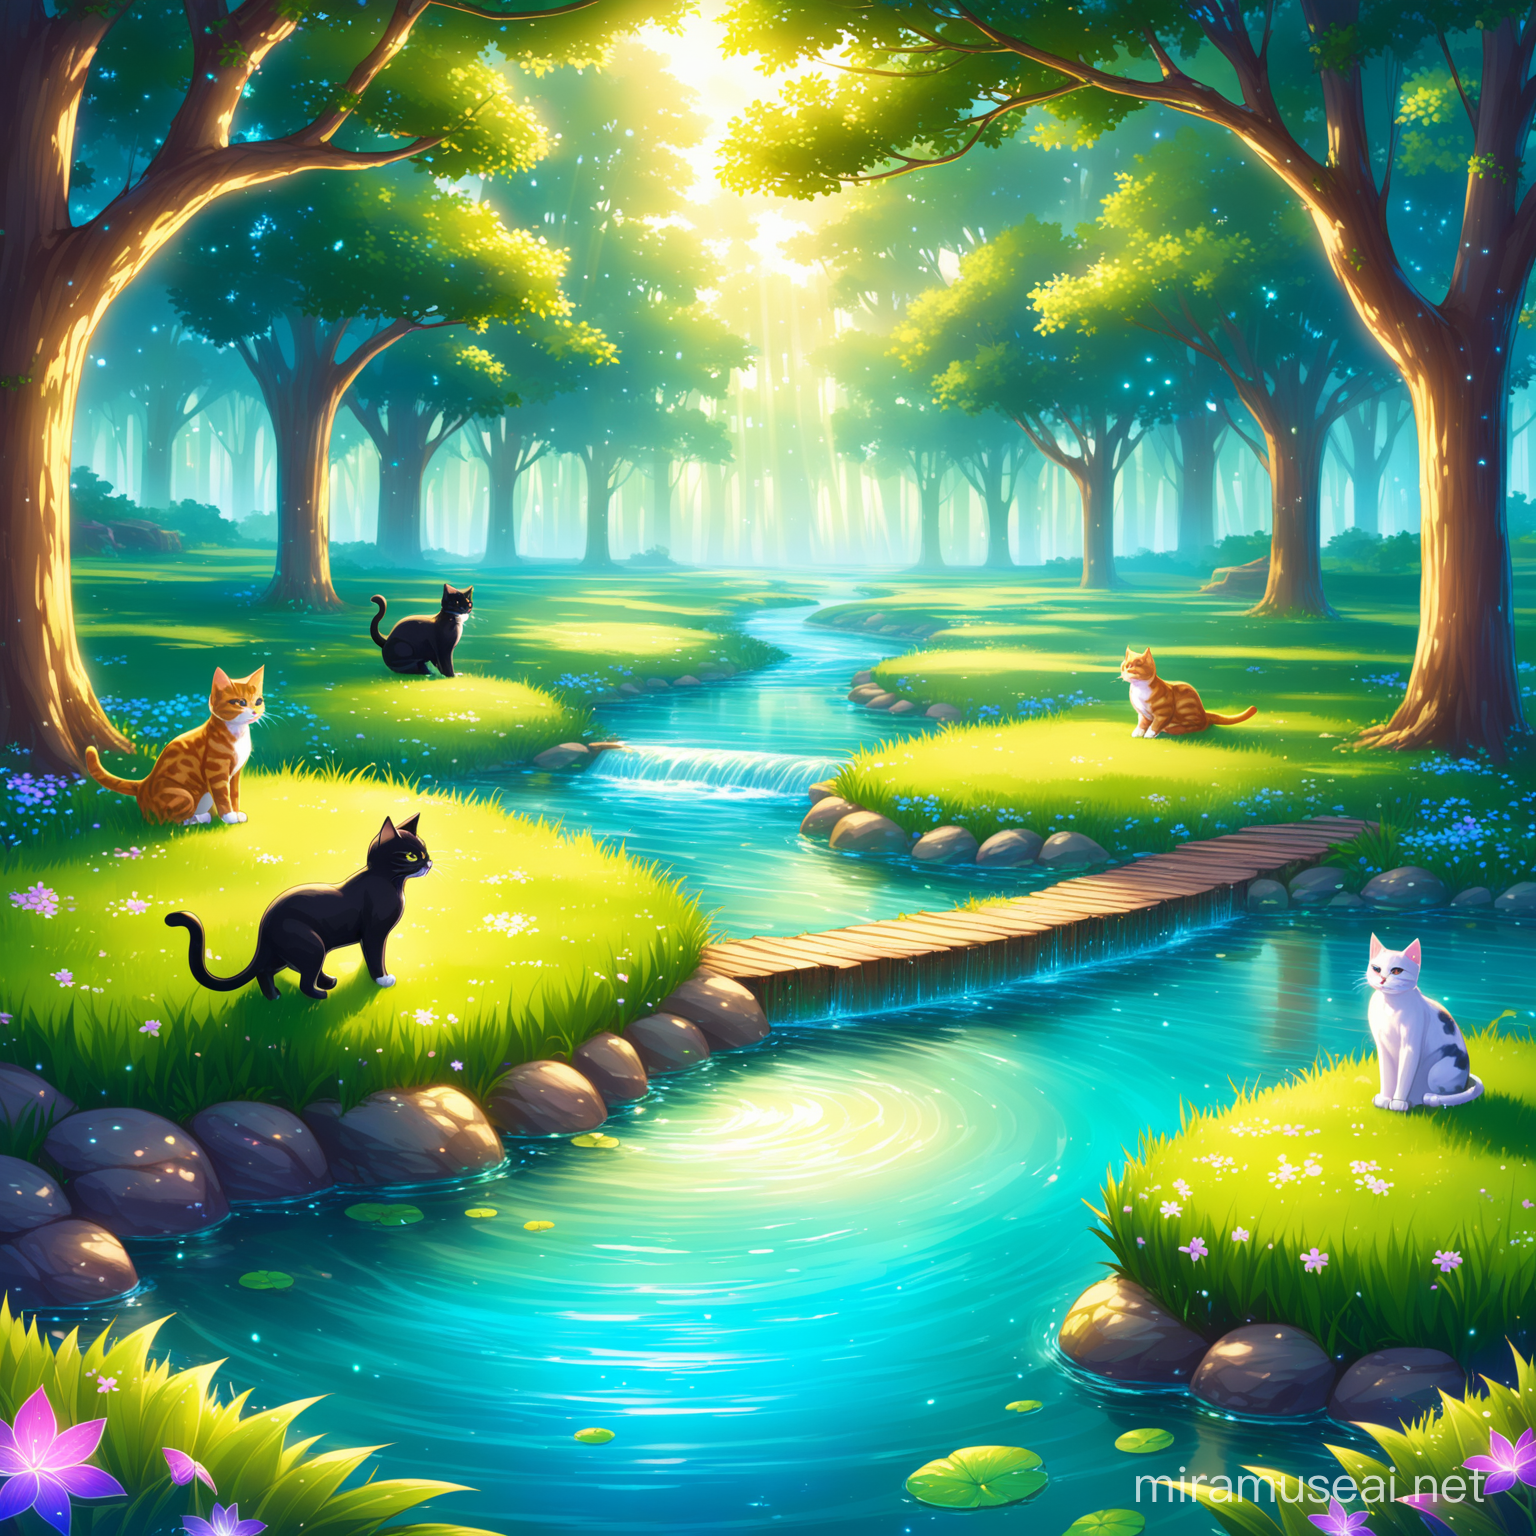 
sanctuary for felines in a clearing with a stream in the Dream Realms